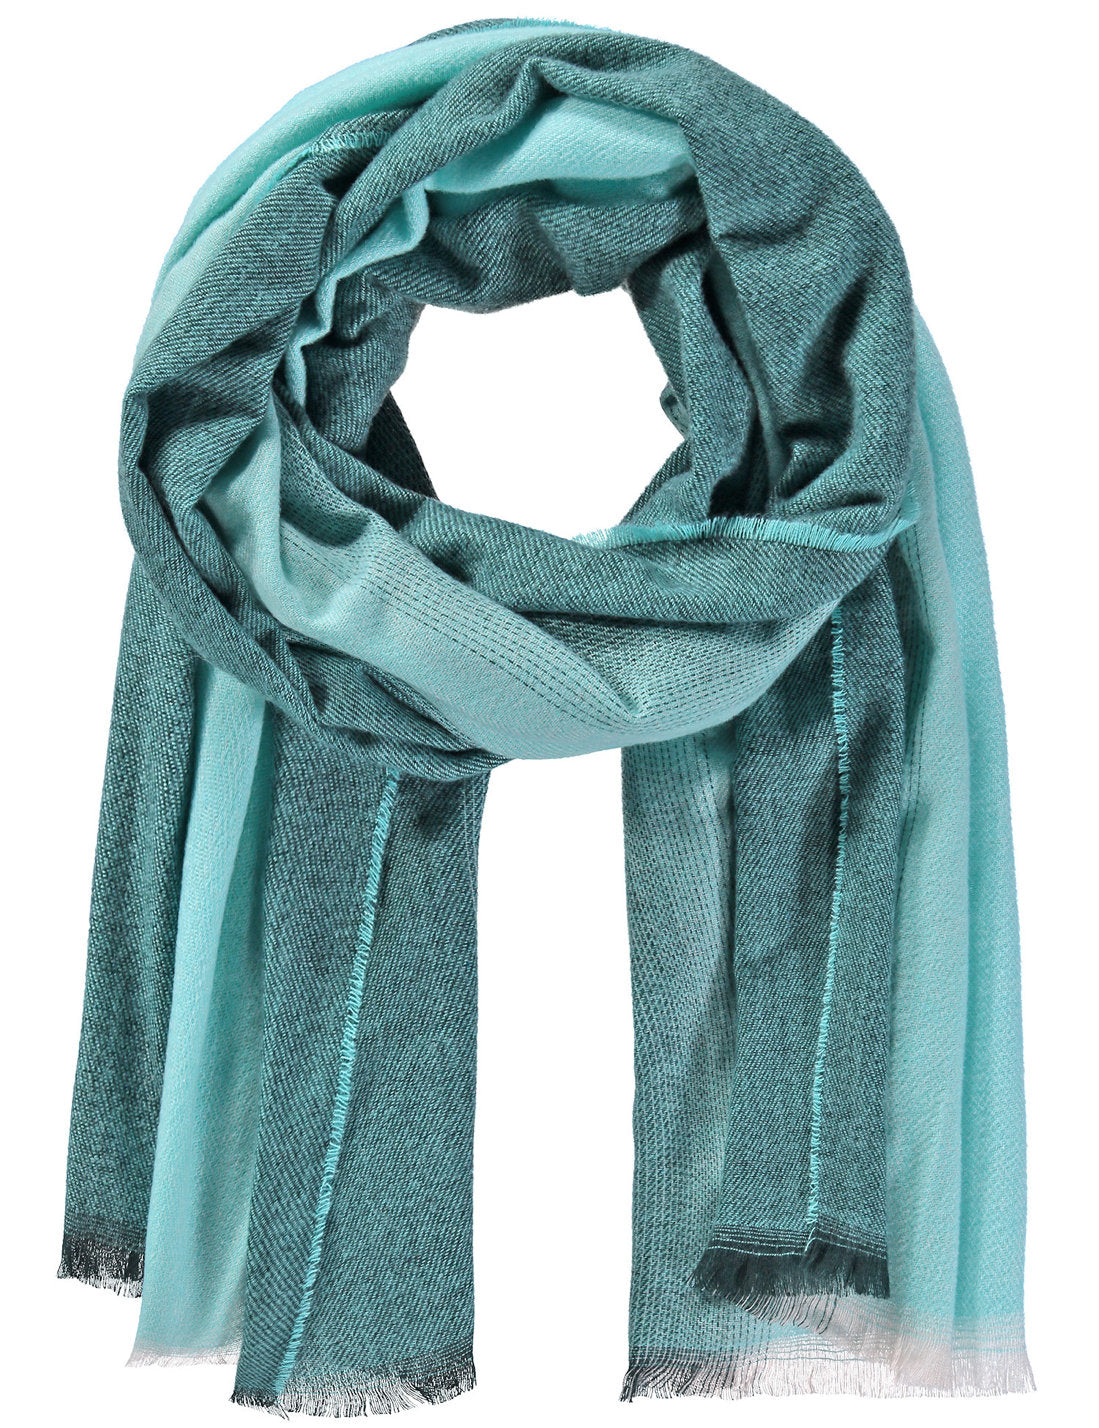 Soft Scarf With A Fringed Edge_101016-72030_5050_02